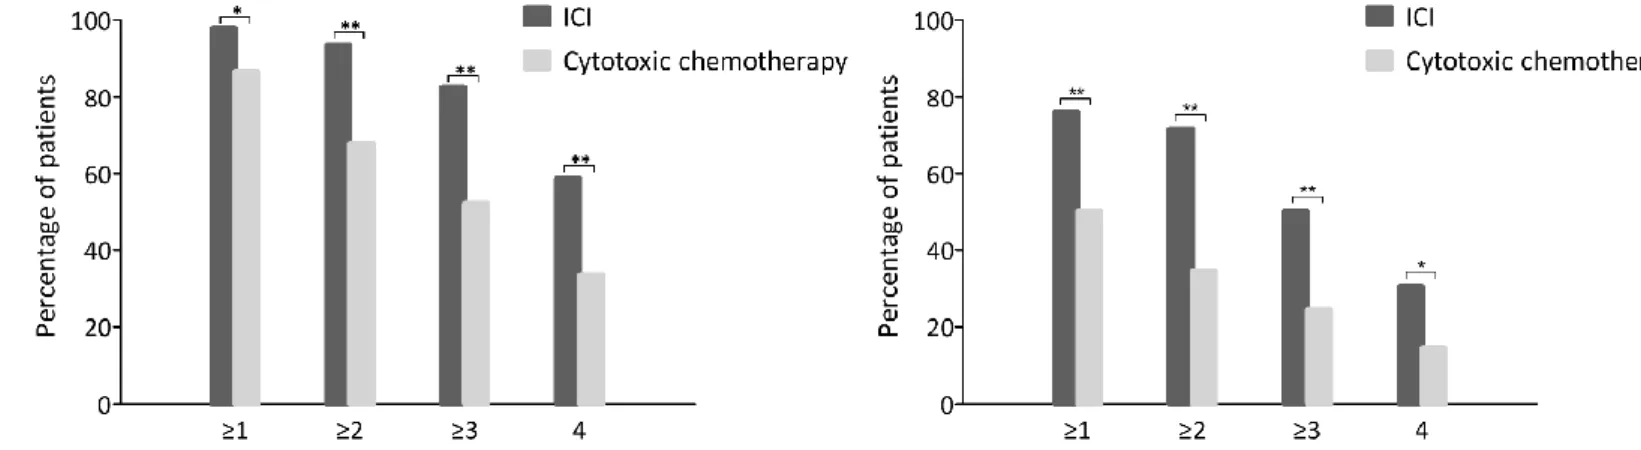 Figure 2 .  Numbers of seroprotective and seroconverted strains in the ICI and cytotoxic chemotherapy groups